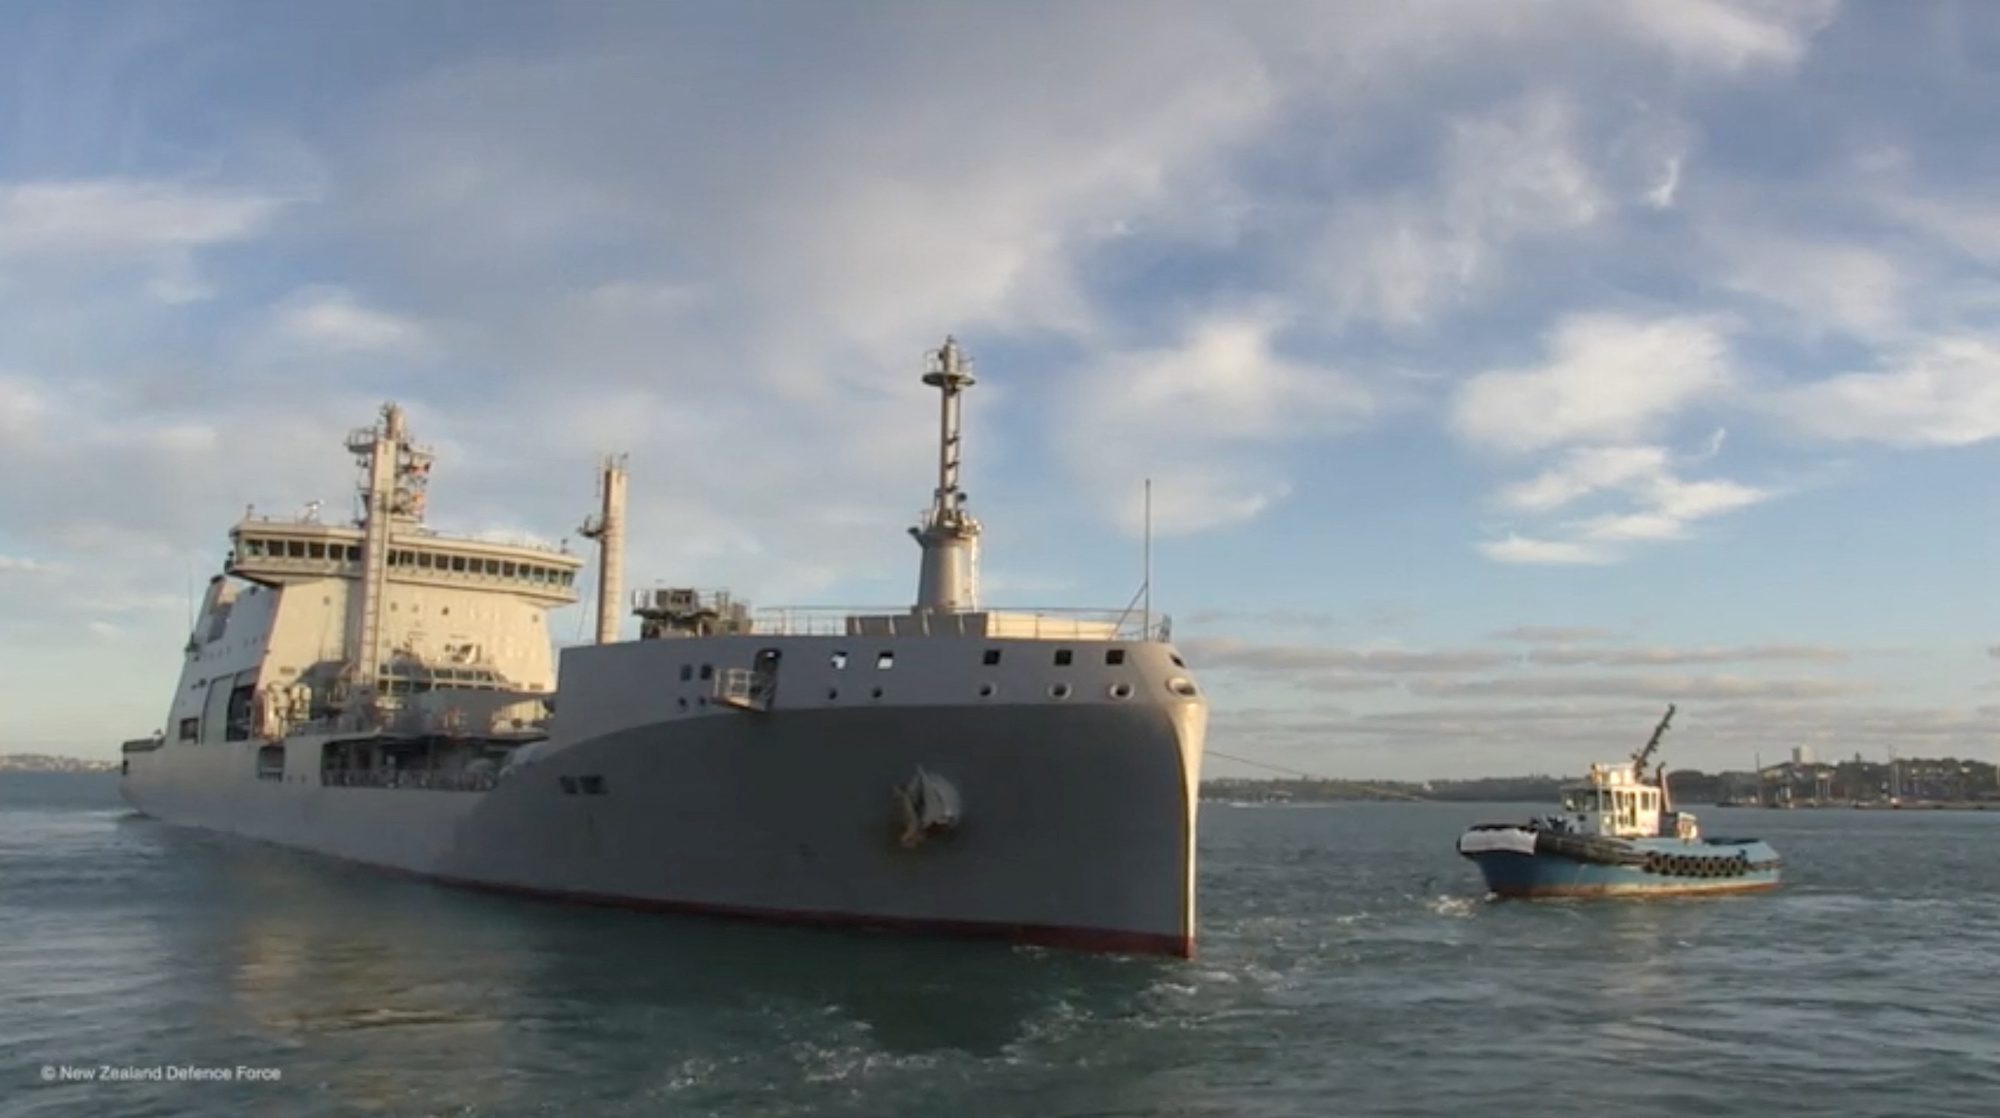 New Zealand Navy Ship Arrives in Tonga Carrying Fresh Water